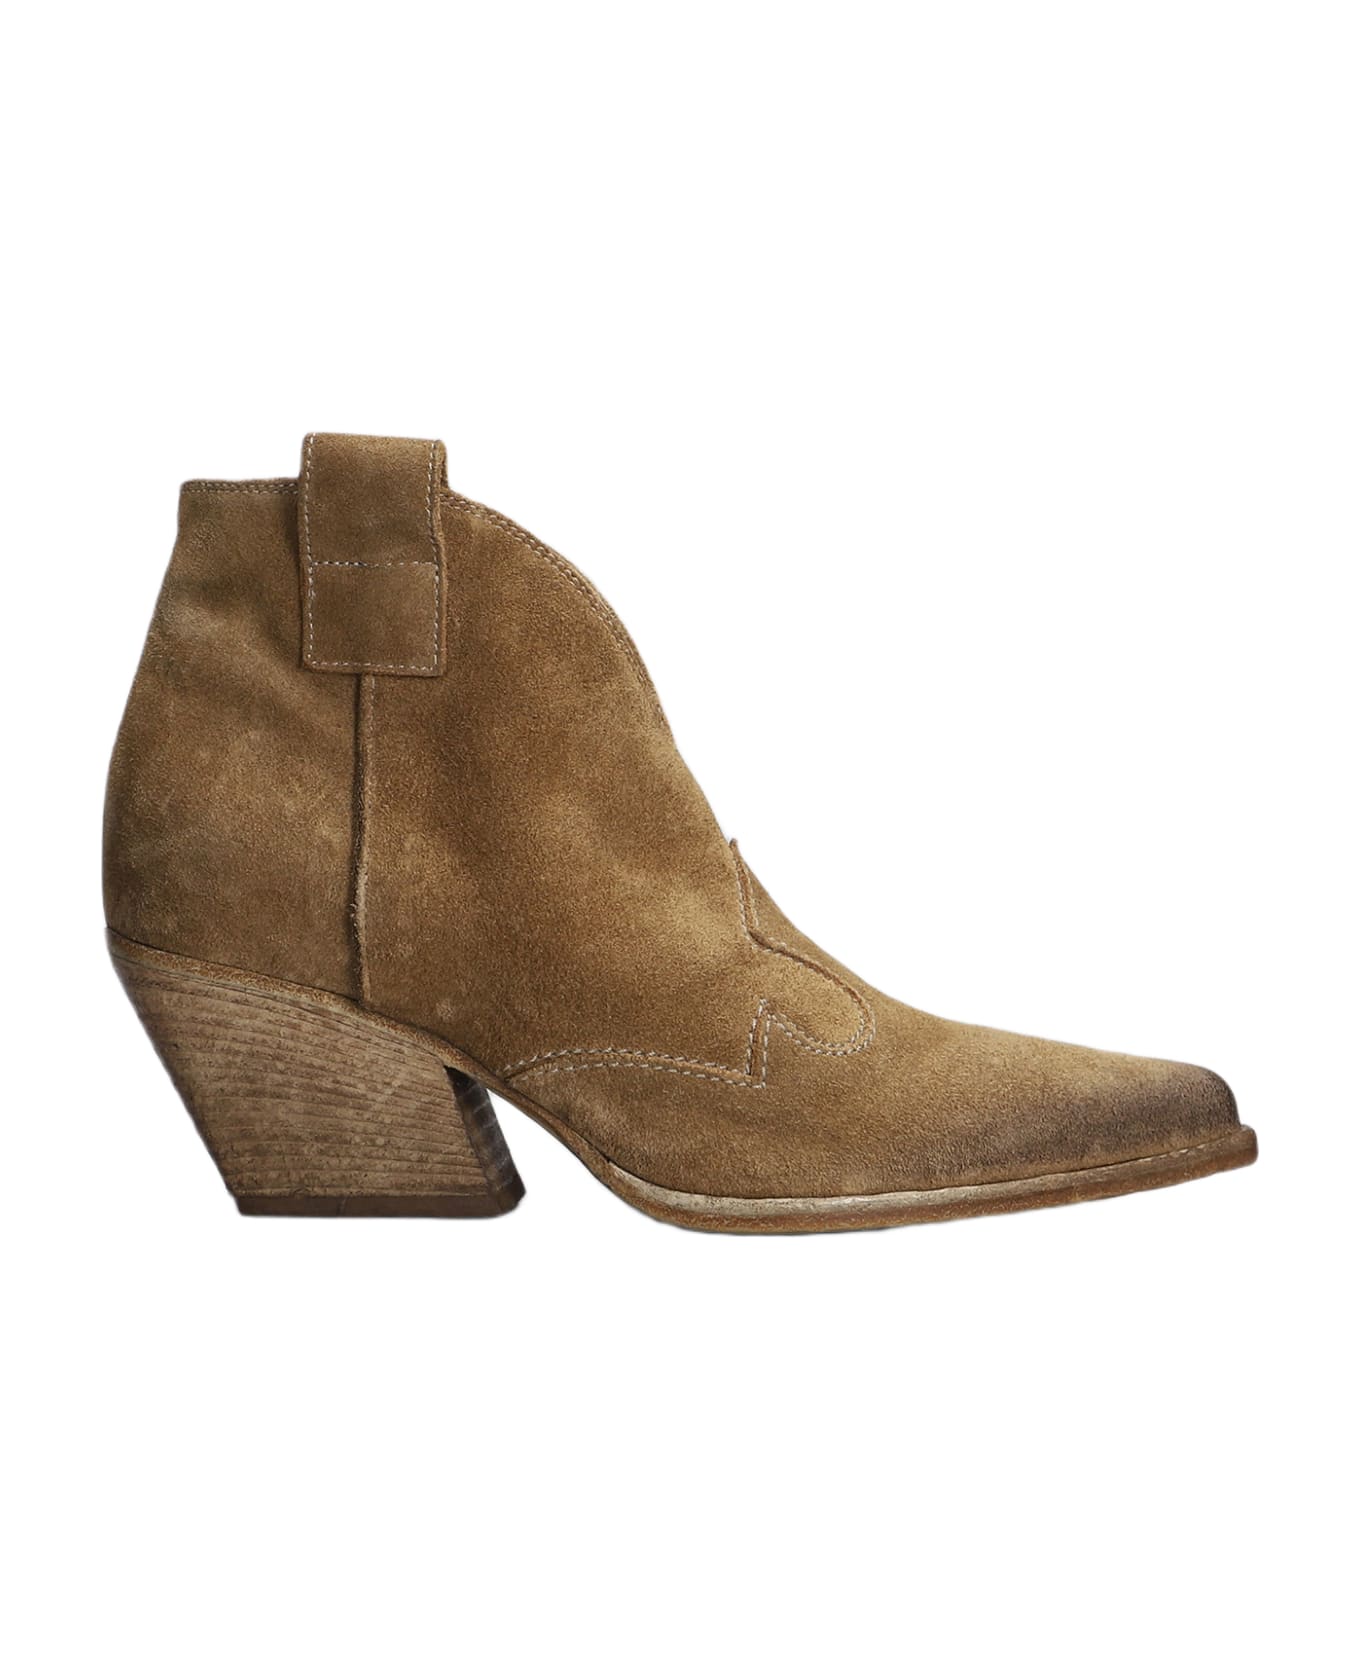 Elena Iachi Texan Ankle Boots In Camel Suede - Camel ブーツ